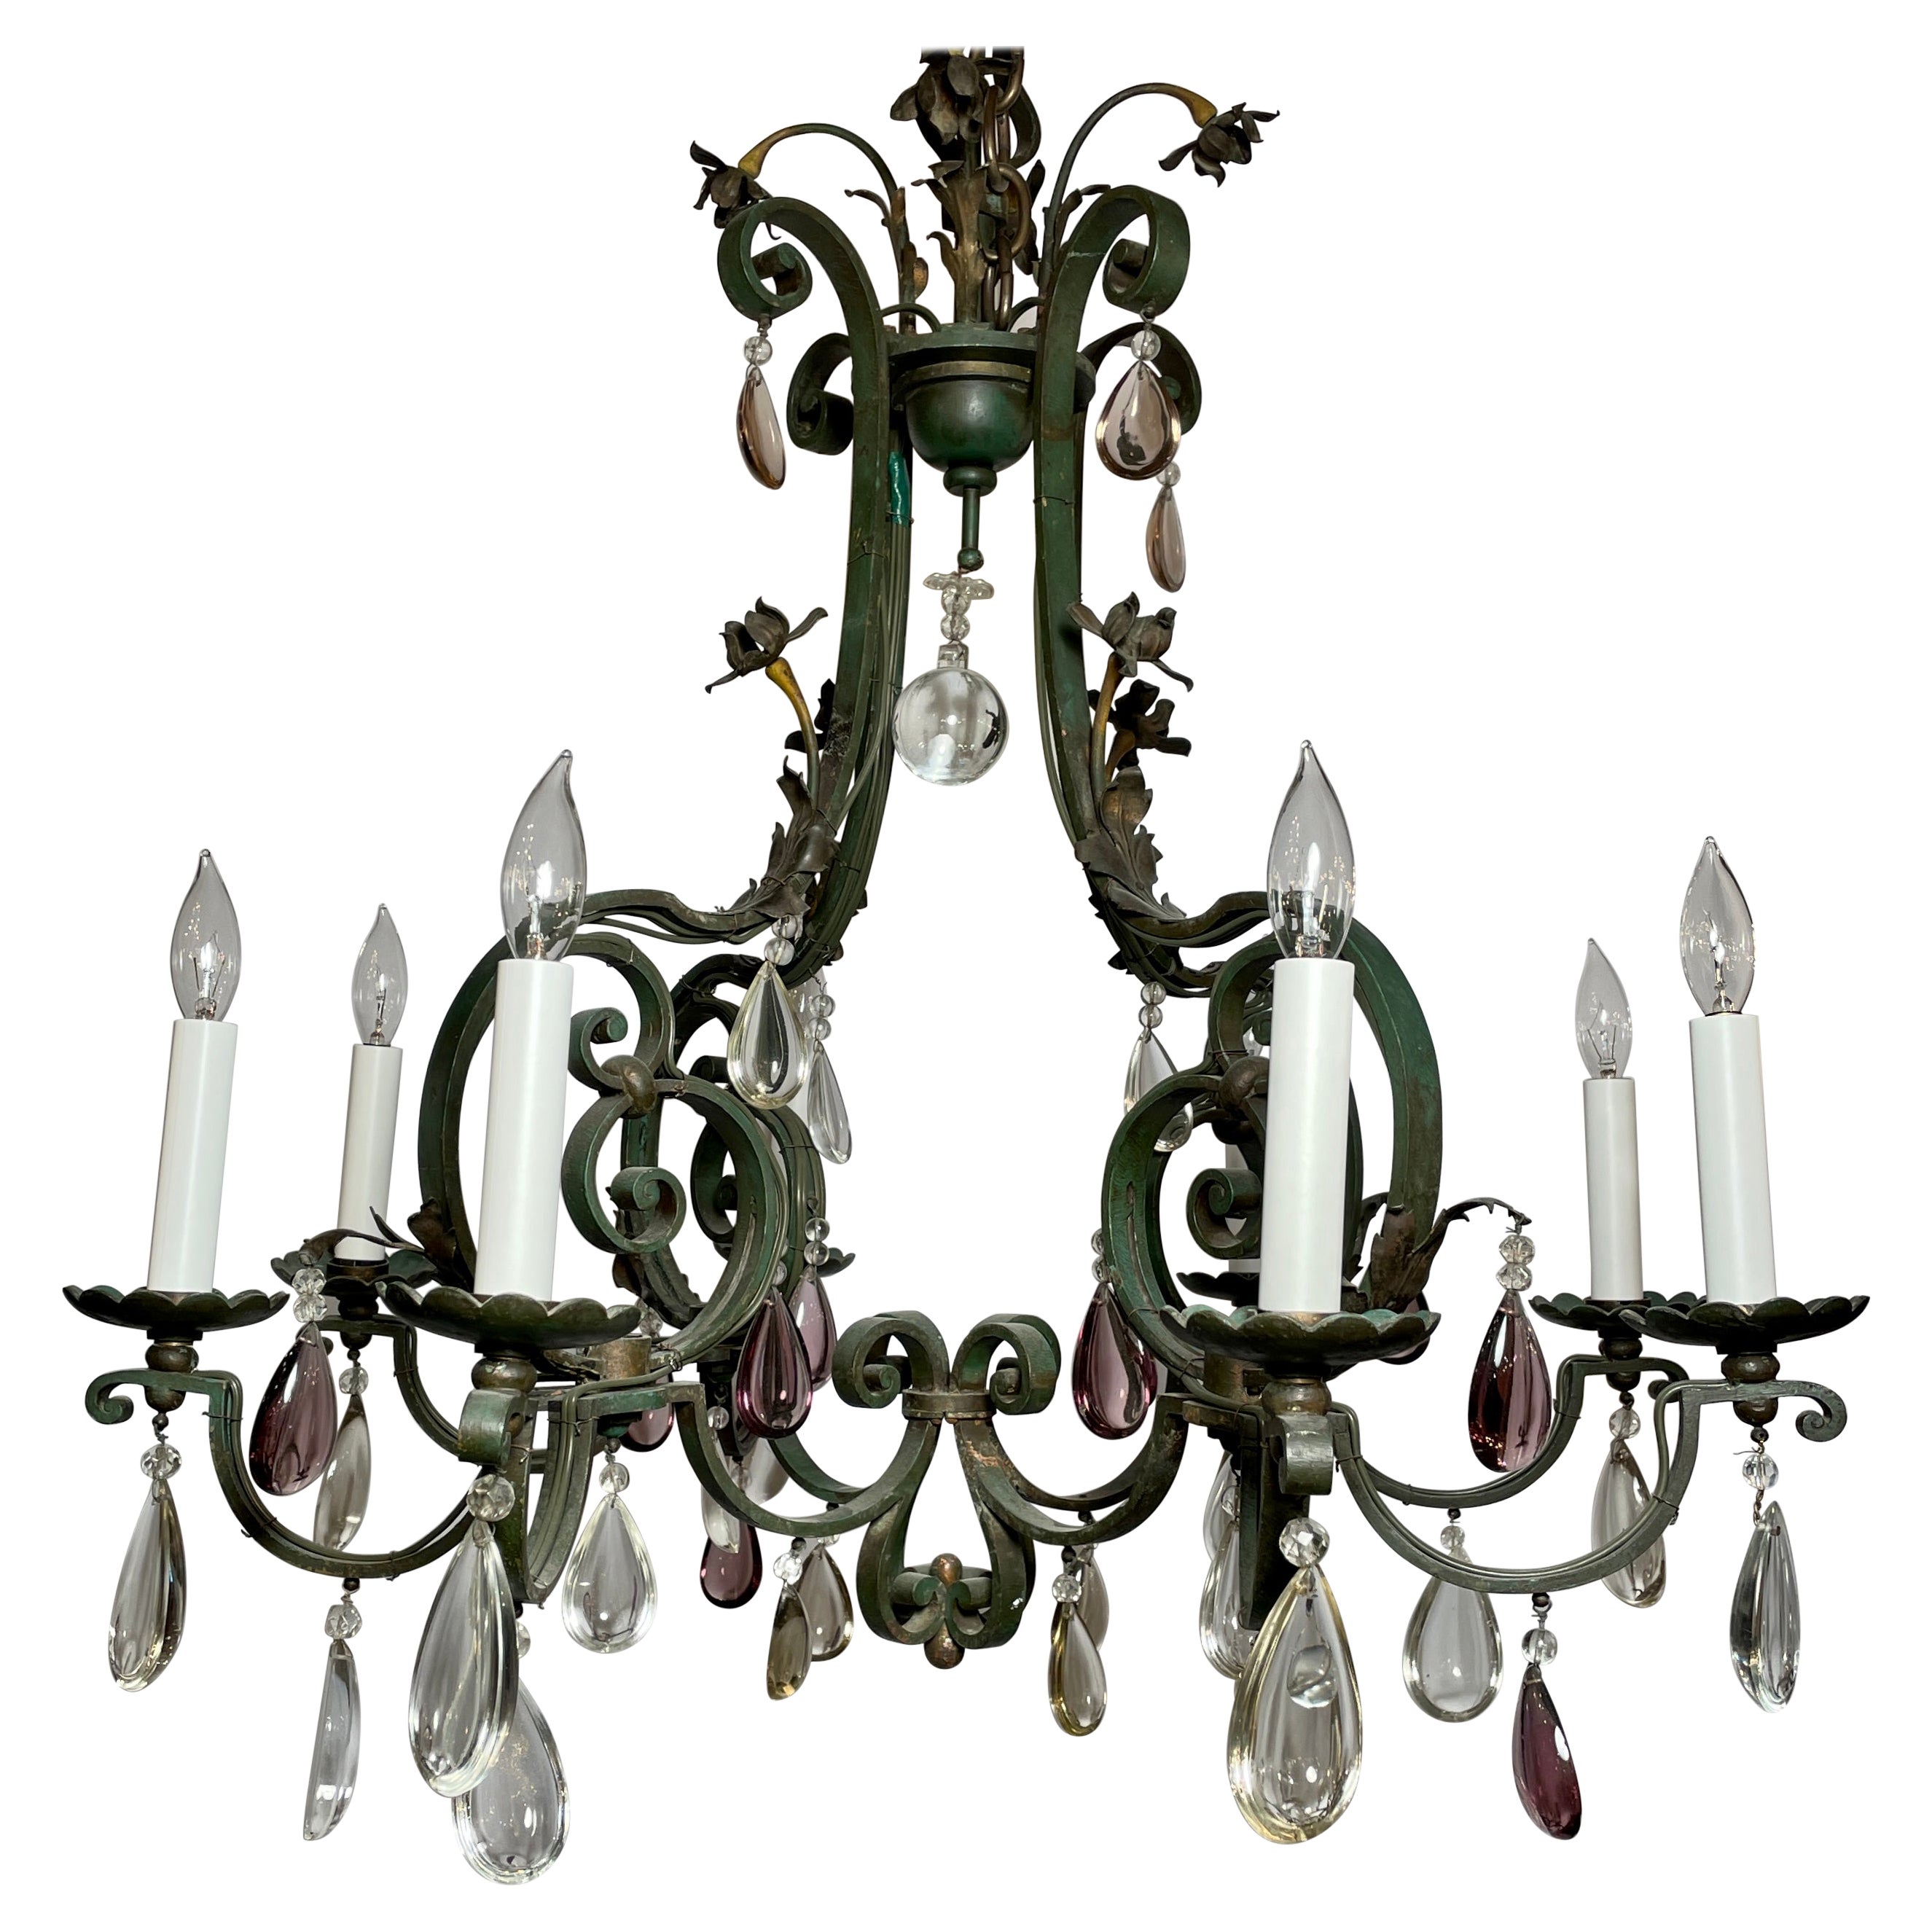 Antique French Wrought Iron & Crystal 8 Light Chandelier, circa 1920